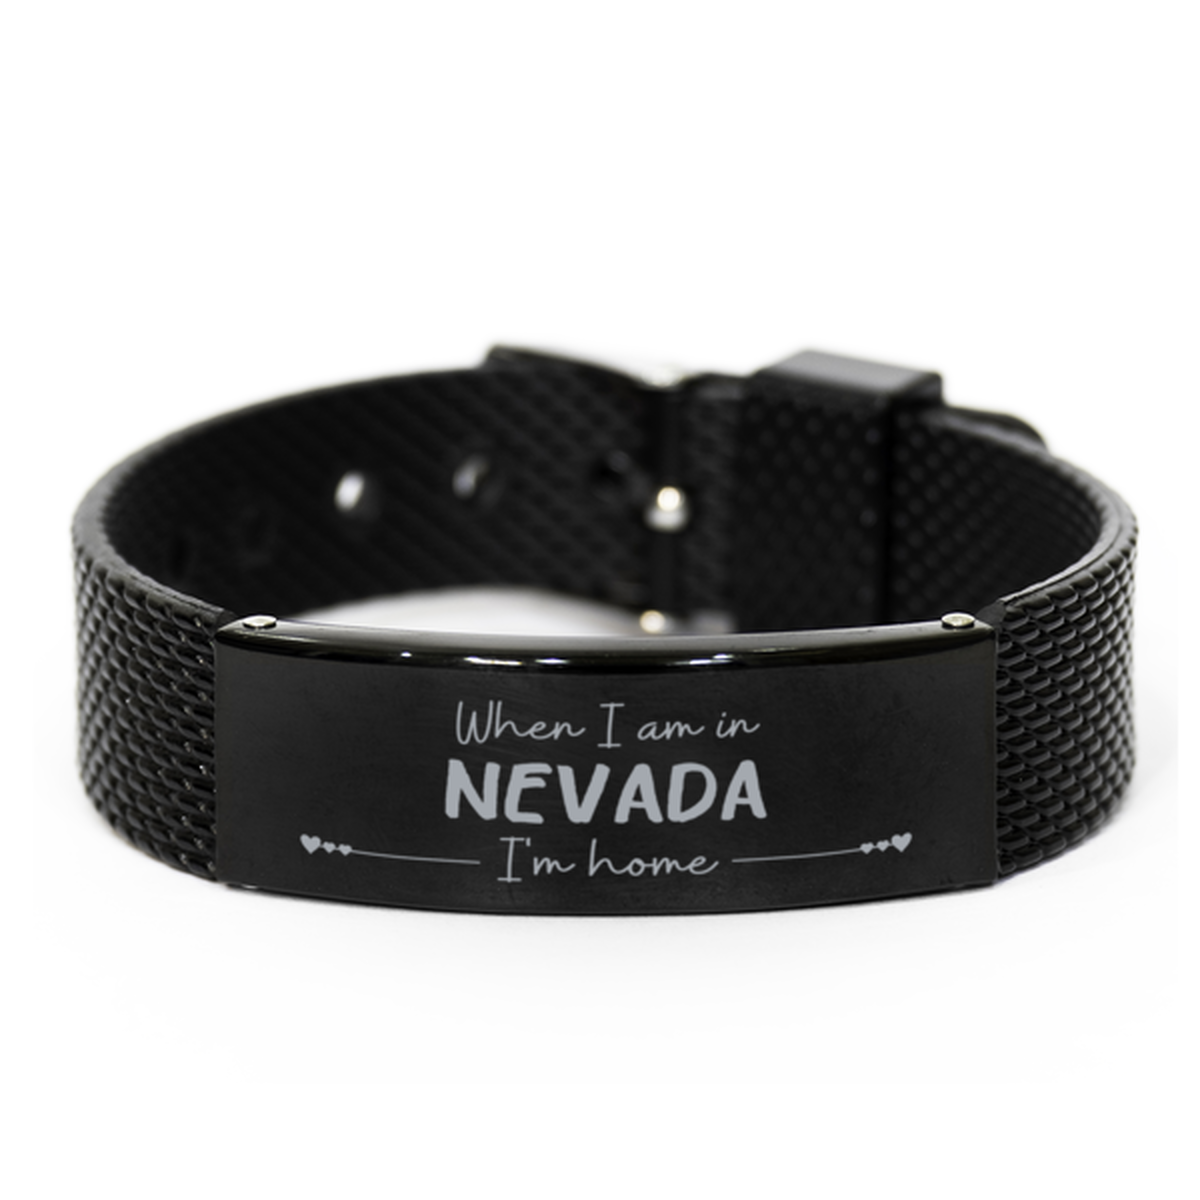 When I am in Nevada I'm home Black Shark Mesh Bracelet, Cheap Gifts For Nevada, State Nevada Birthday Gifts for Friends Coworker